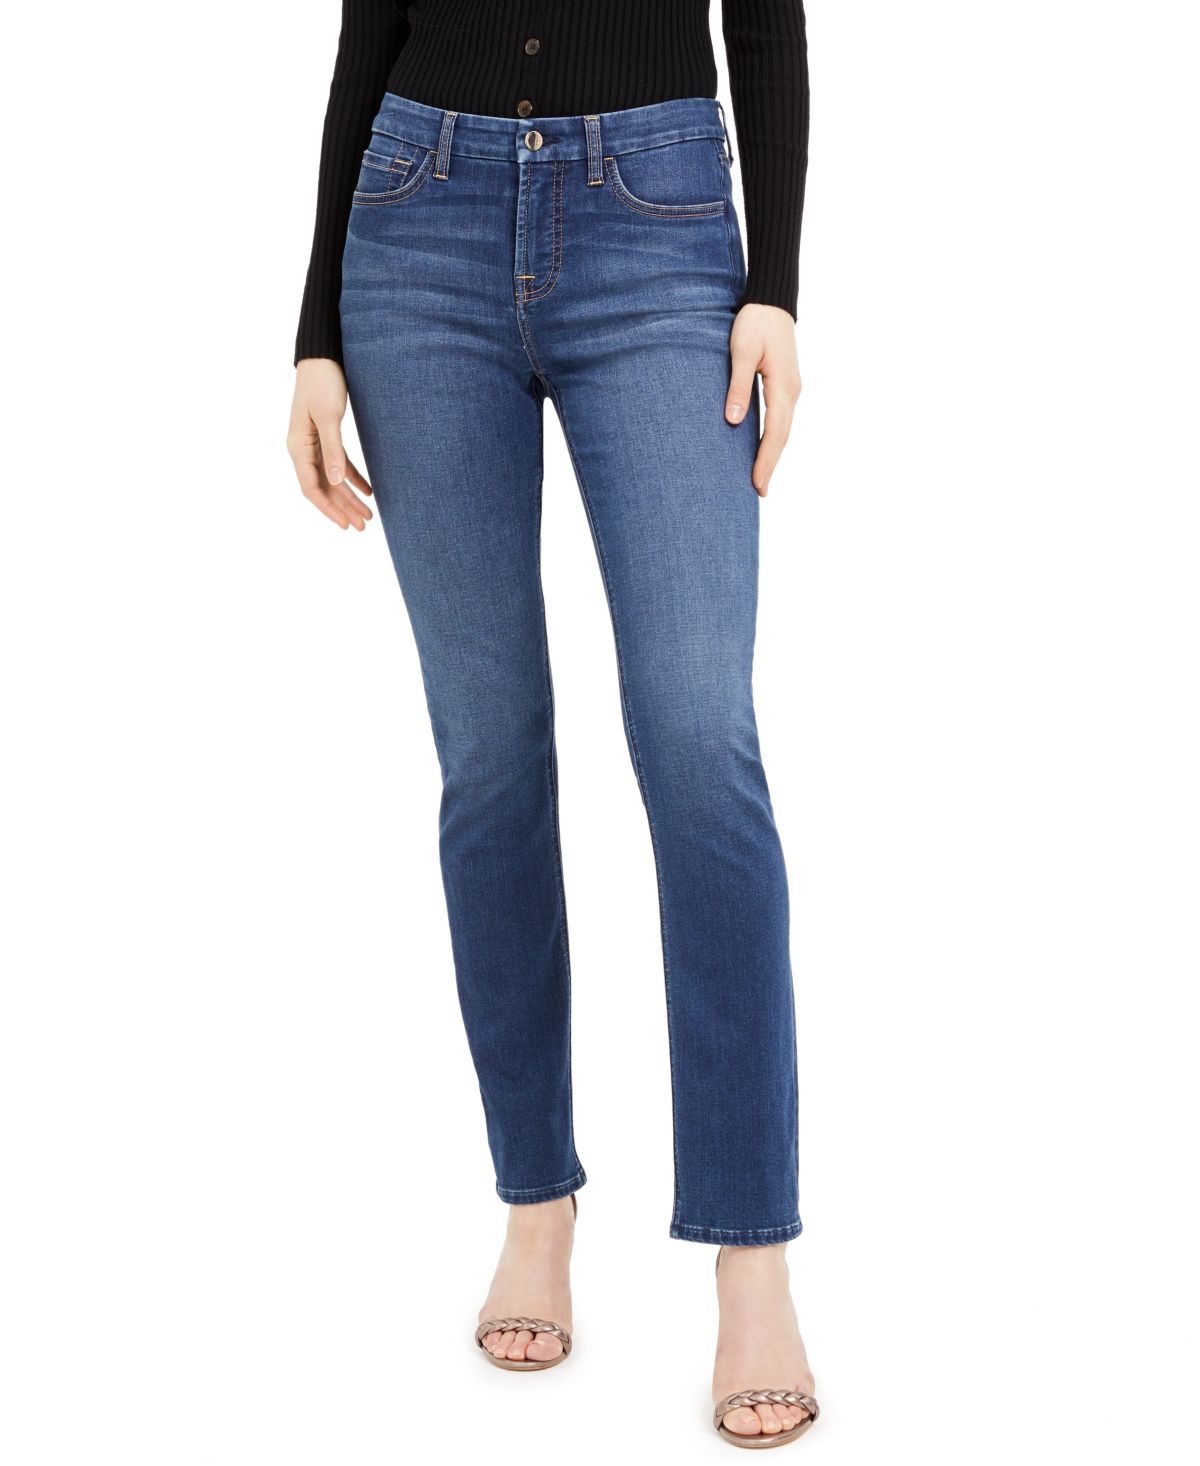  JEN7 by 7 For All Mankind Slim Straight Jeans